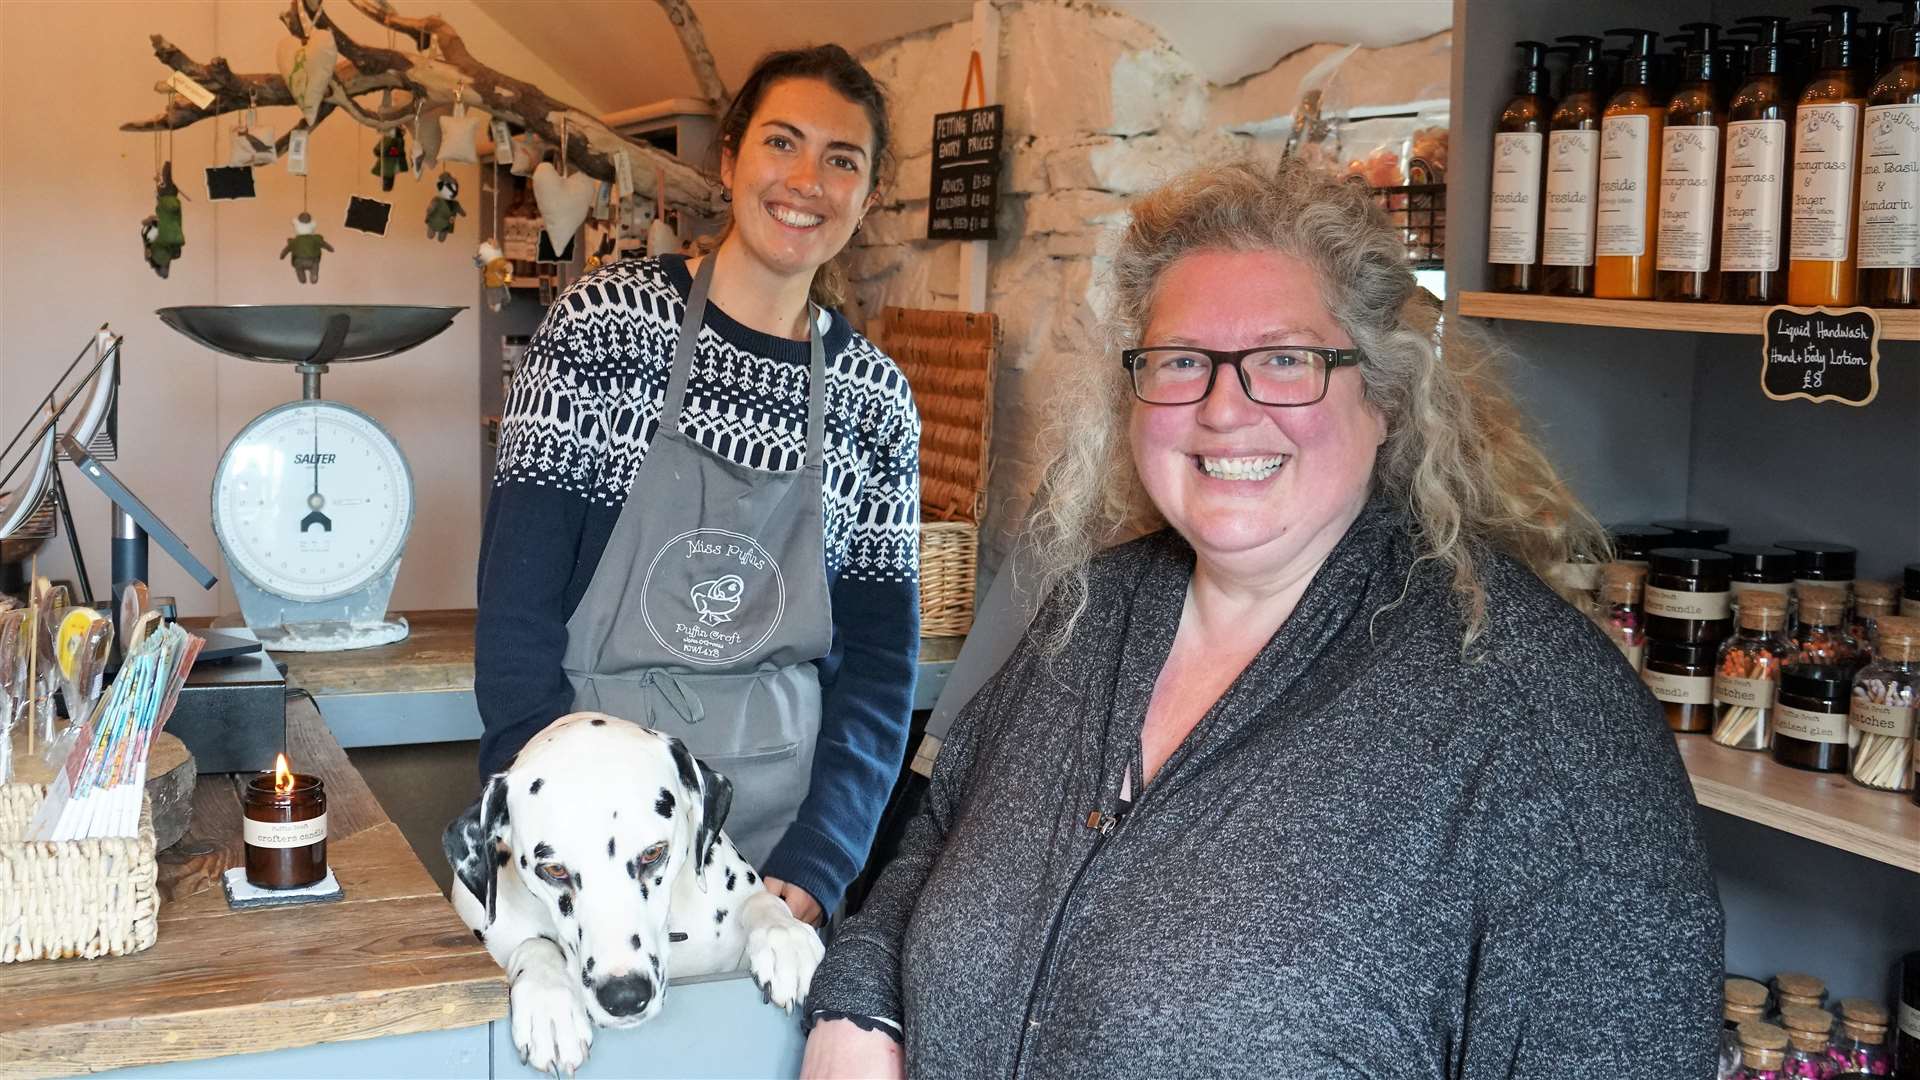 Juliette Dubois on her working holiday from France, left, with Measles the Dalmatian and Cara Young owner of Puffin Croft. Picture: DGS